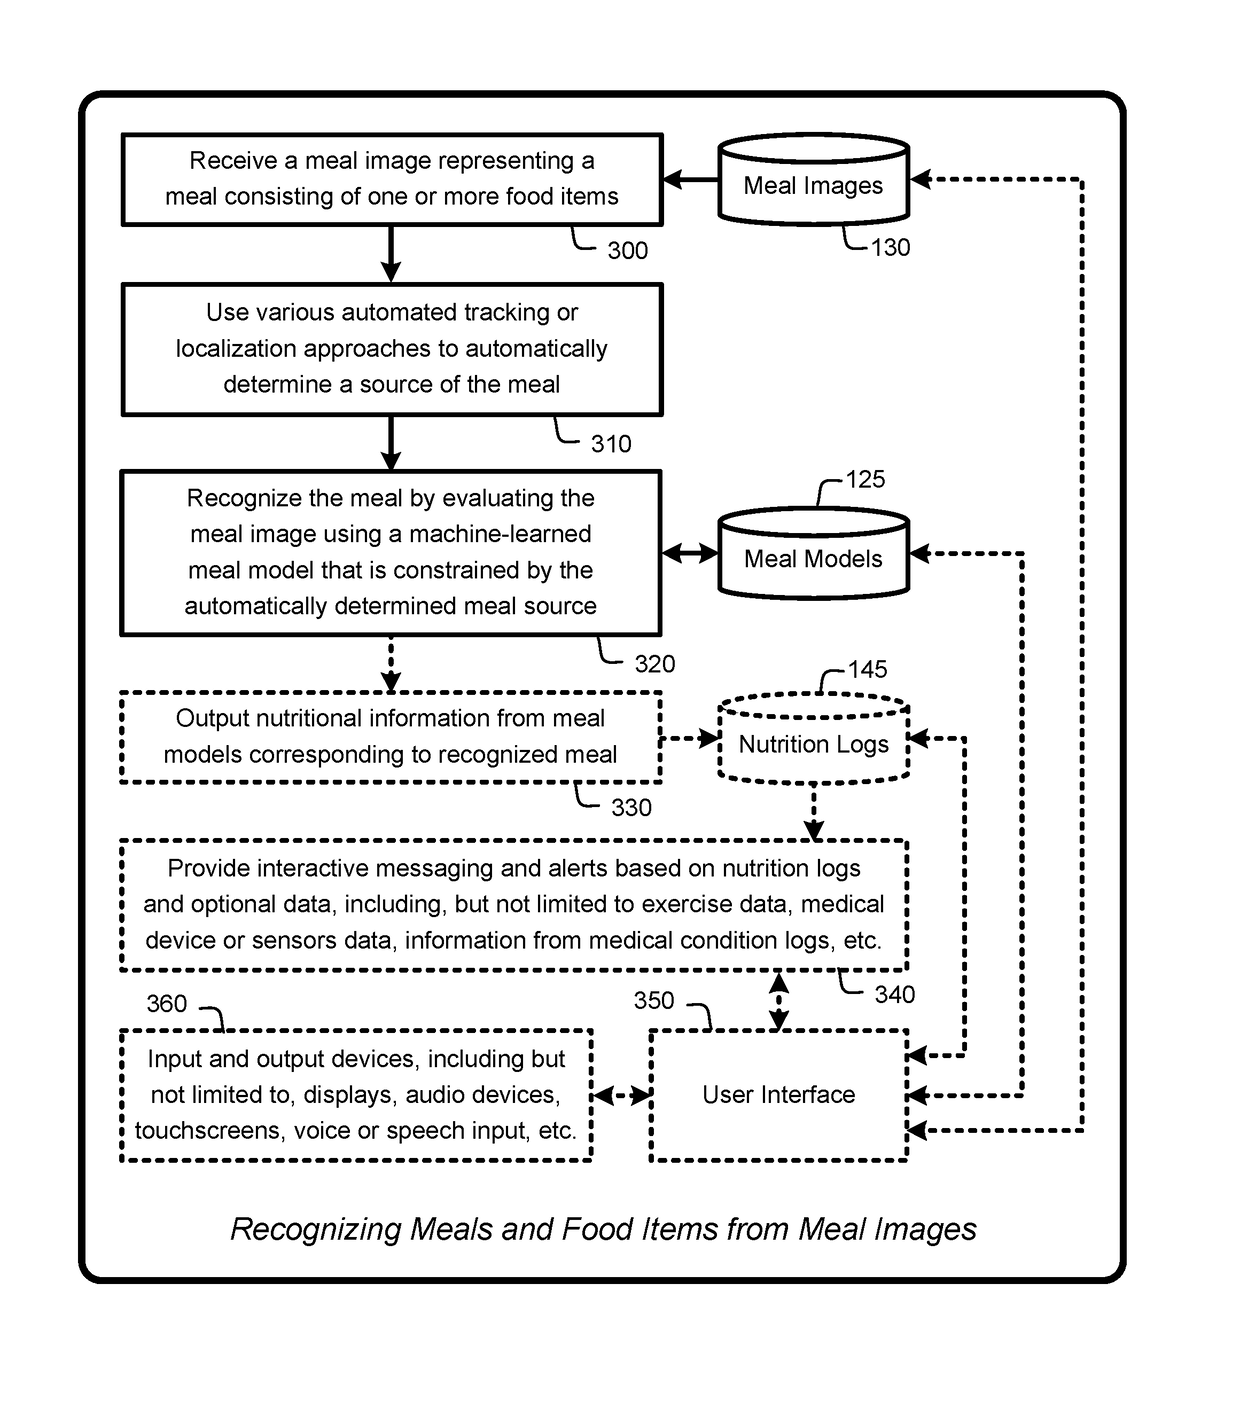 Food logging from images